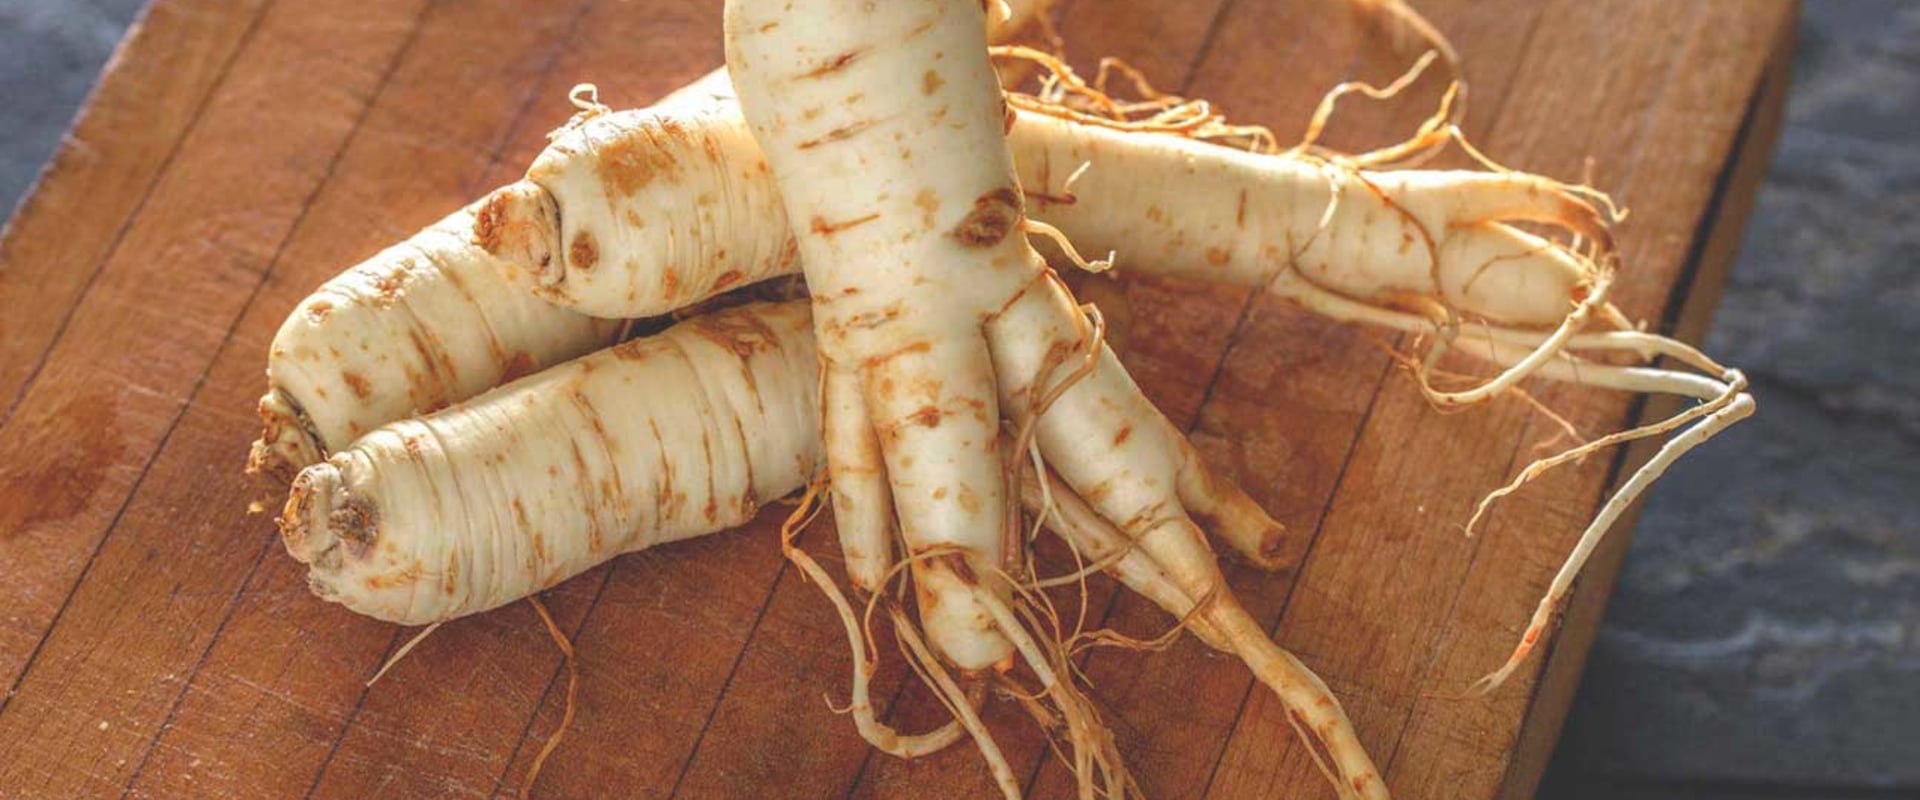 Ginseng: An Overview of the Herbal Supplement